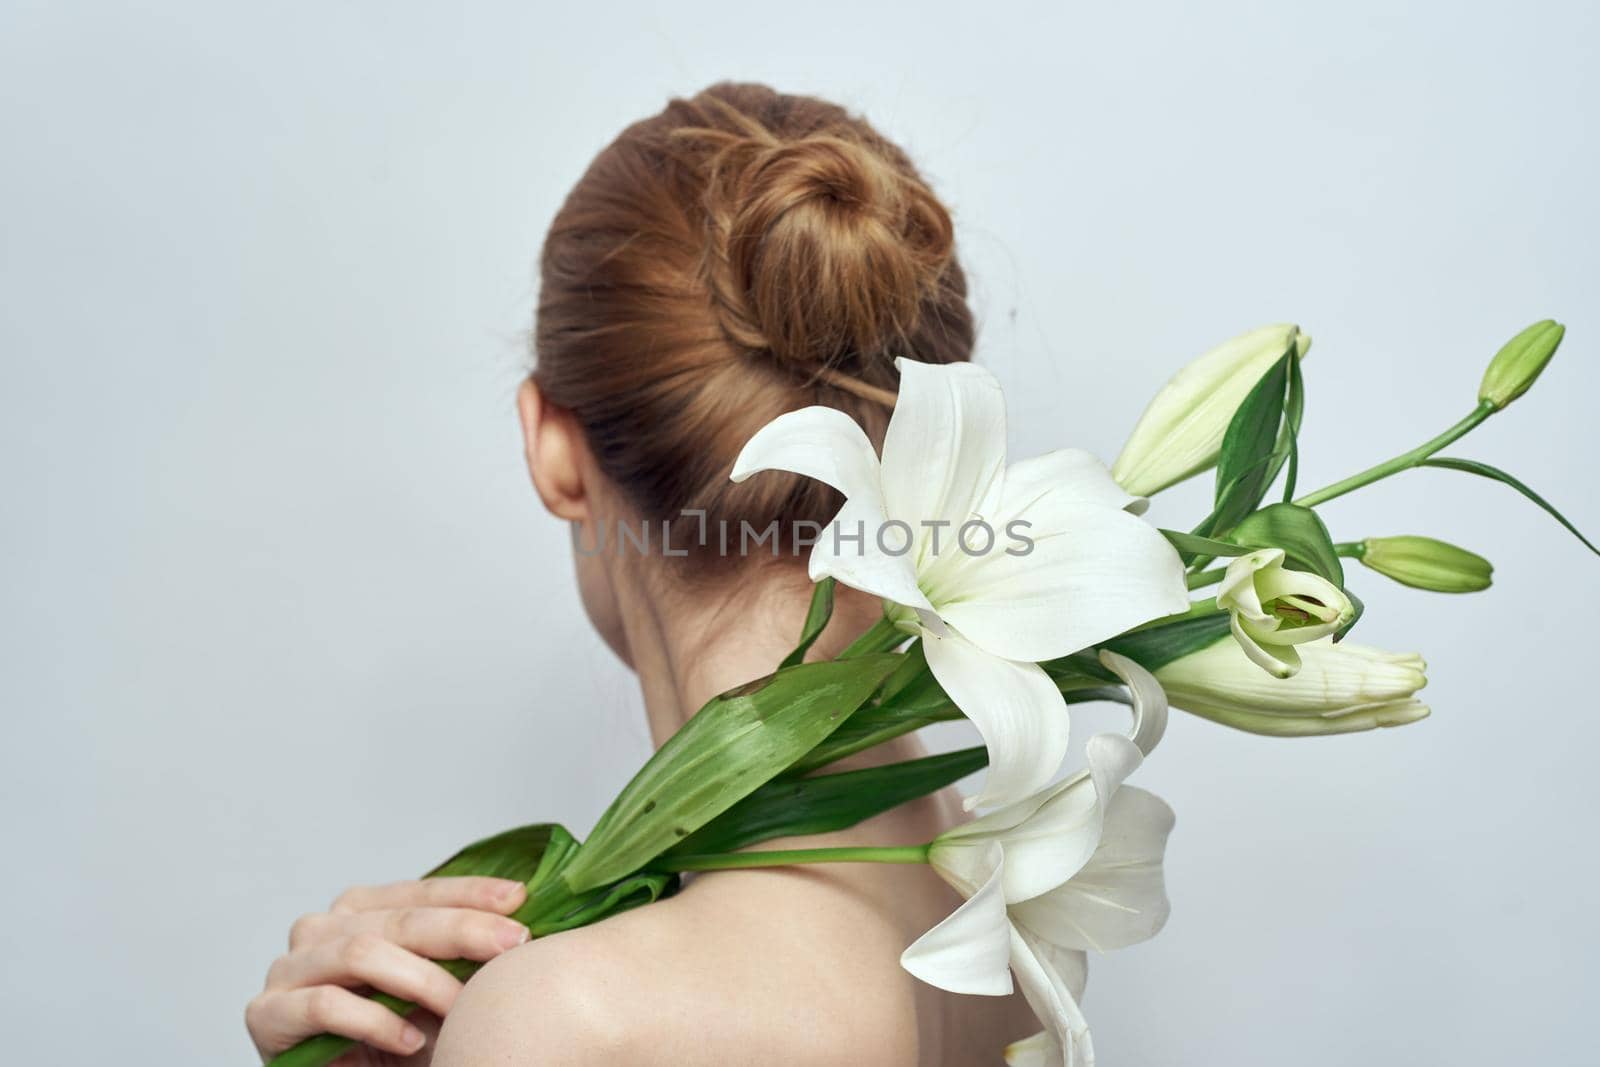 Lady with a bouquet of white flowers on a gray background portrait cropped view close-up. High quality photo